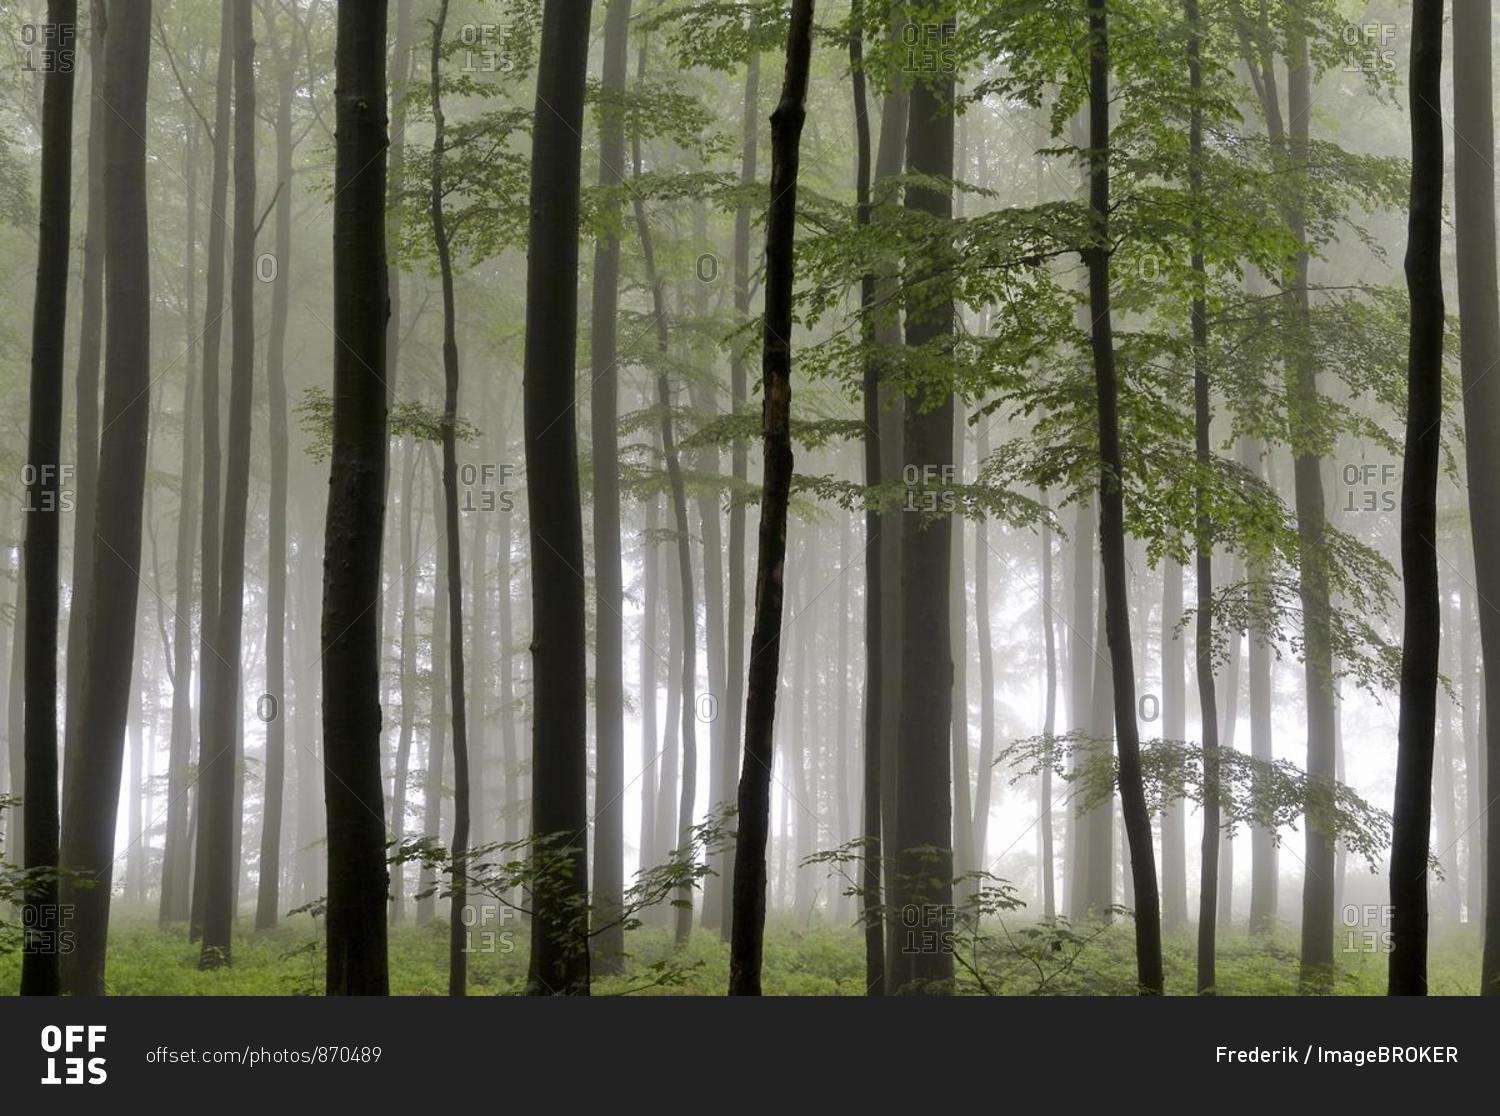 Deciduous forest with Beech trees (Fagus sylvatica) on a foggy rainy day, North Rhine-Westphalia, Germany, Europe